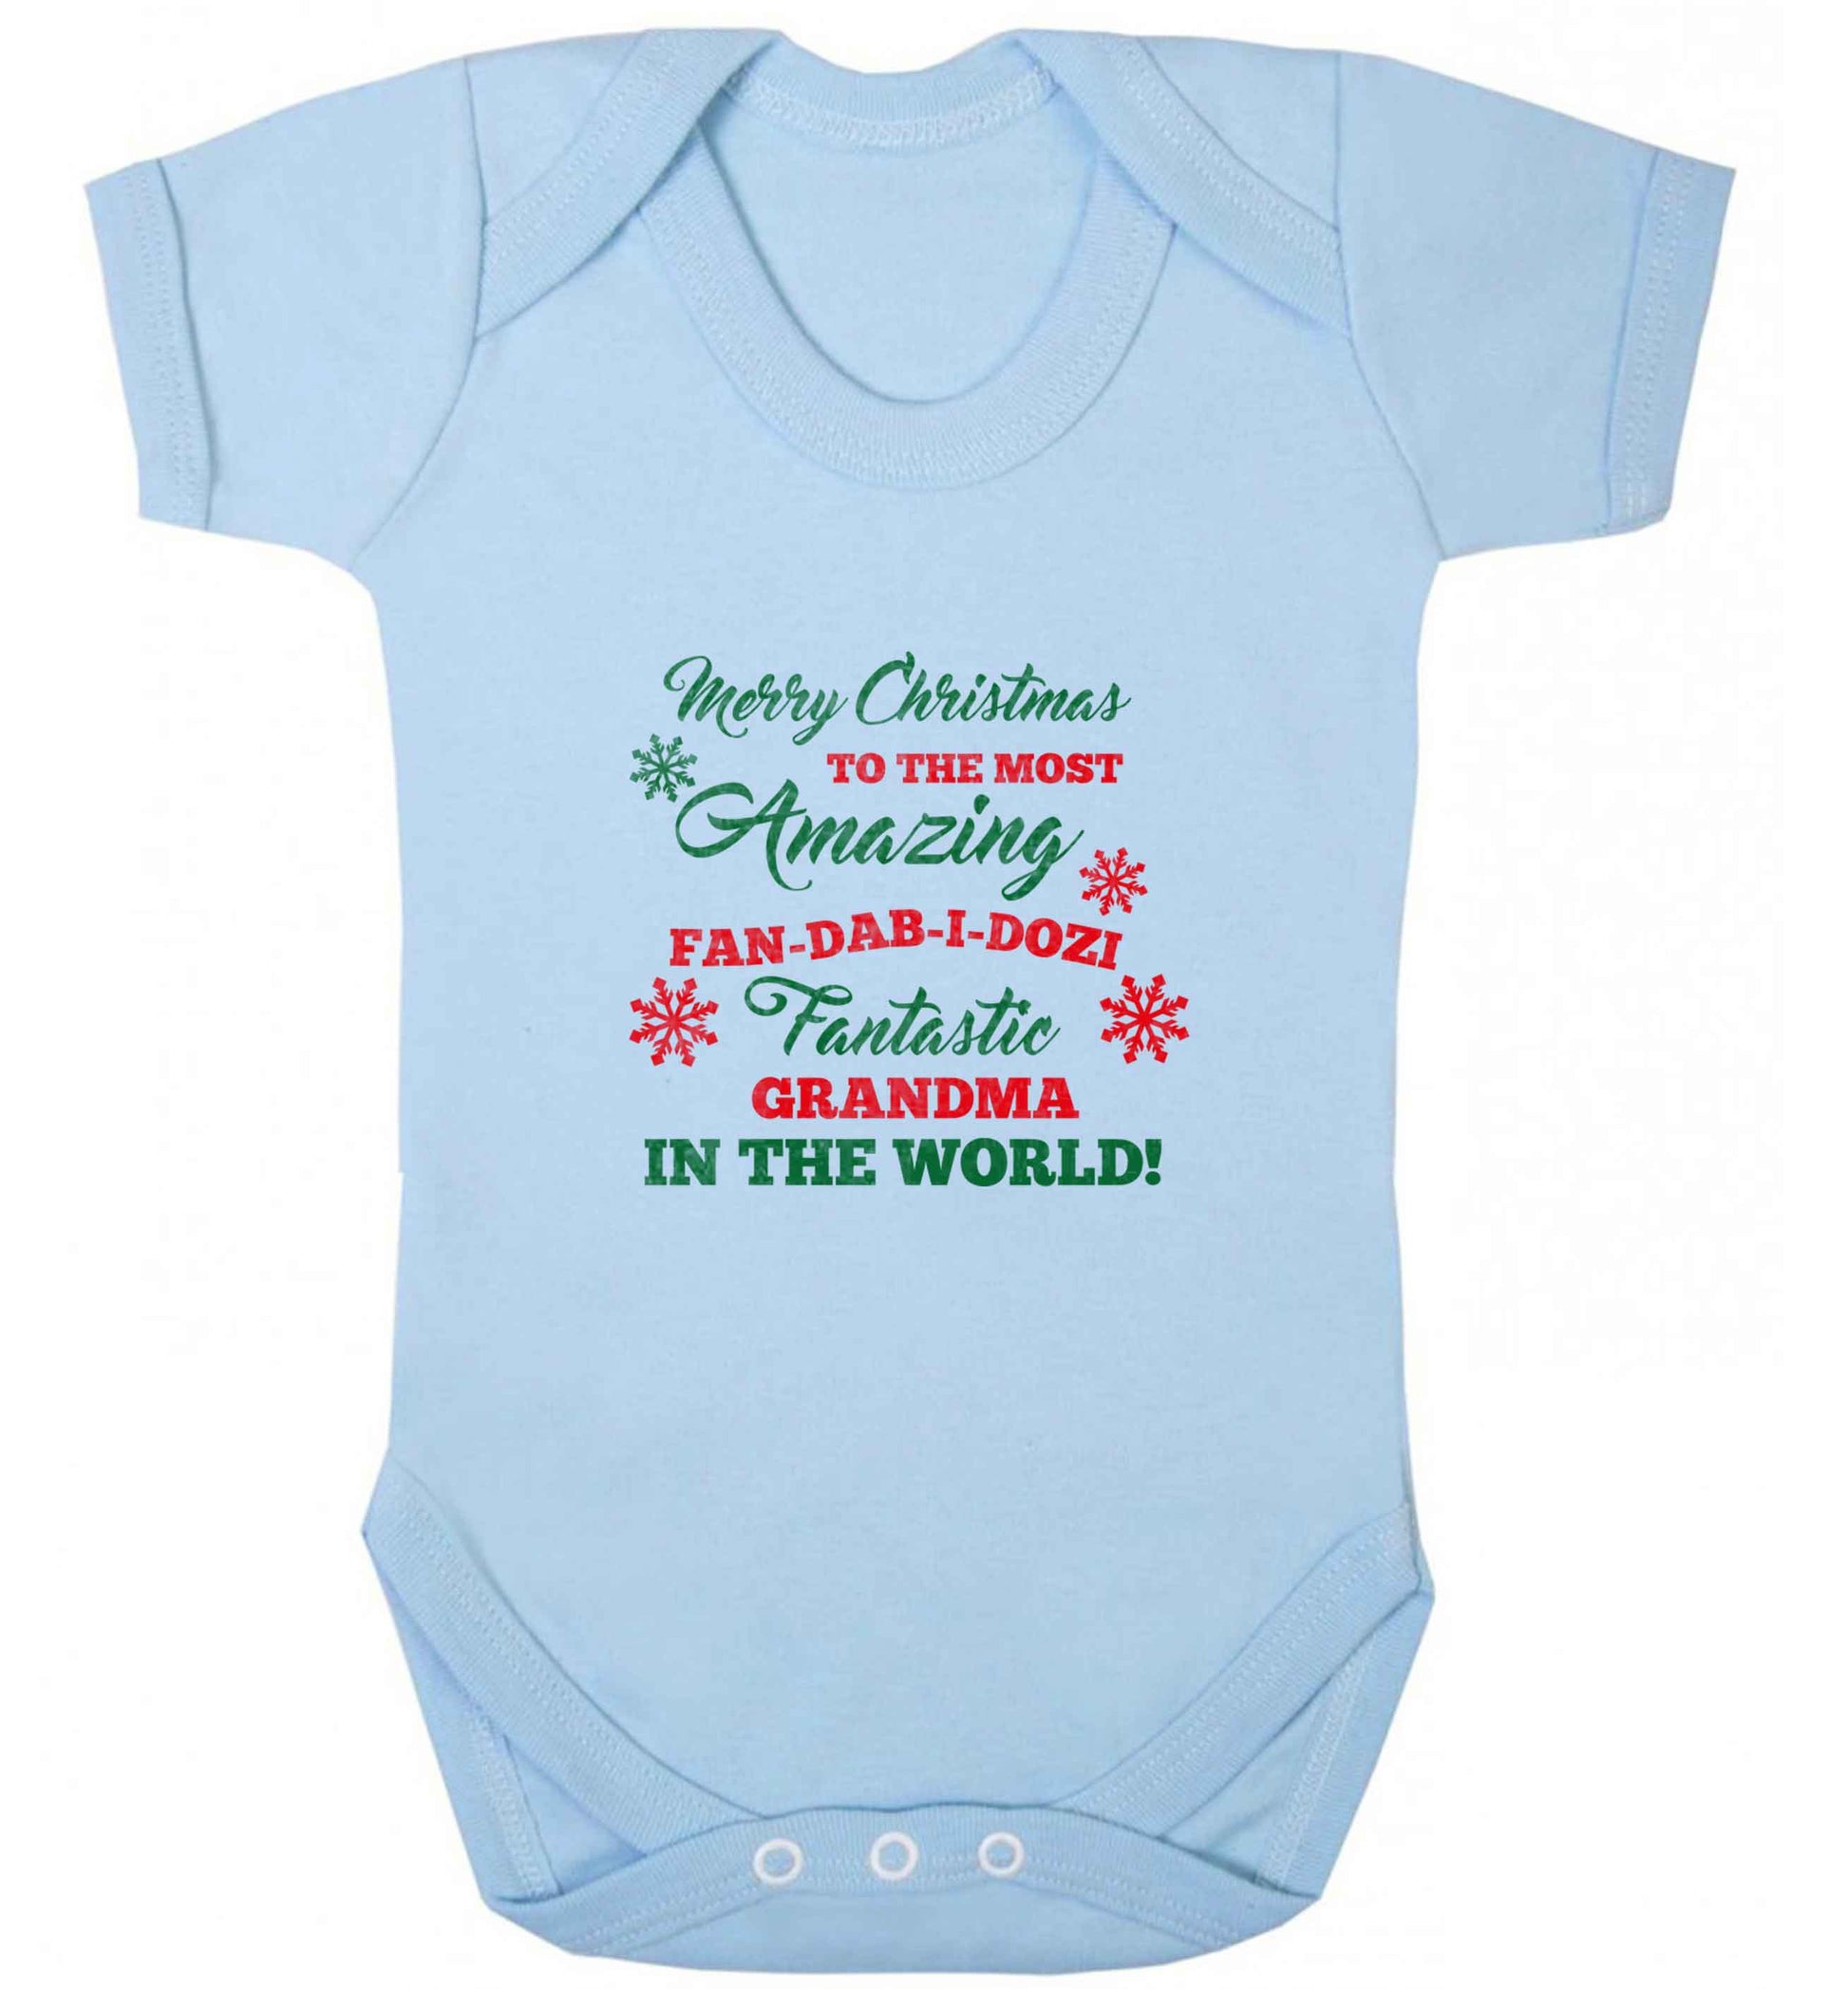 Merry Christmas to the most amazing fan-dab-i-dozi fantasic Grandma in the world baby vest pale blue 18-24 months